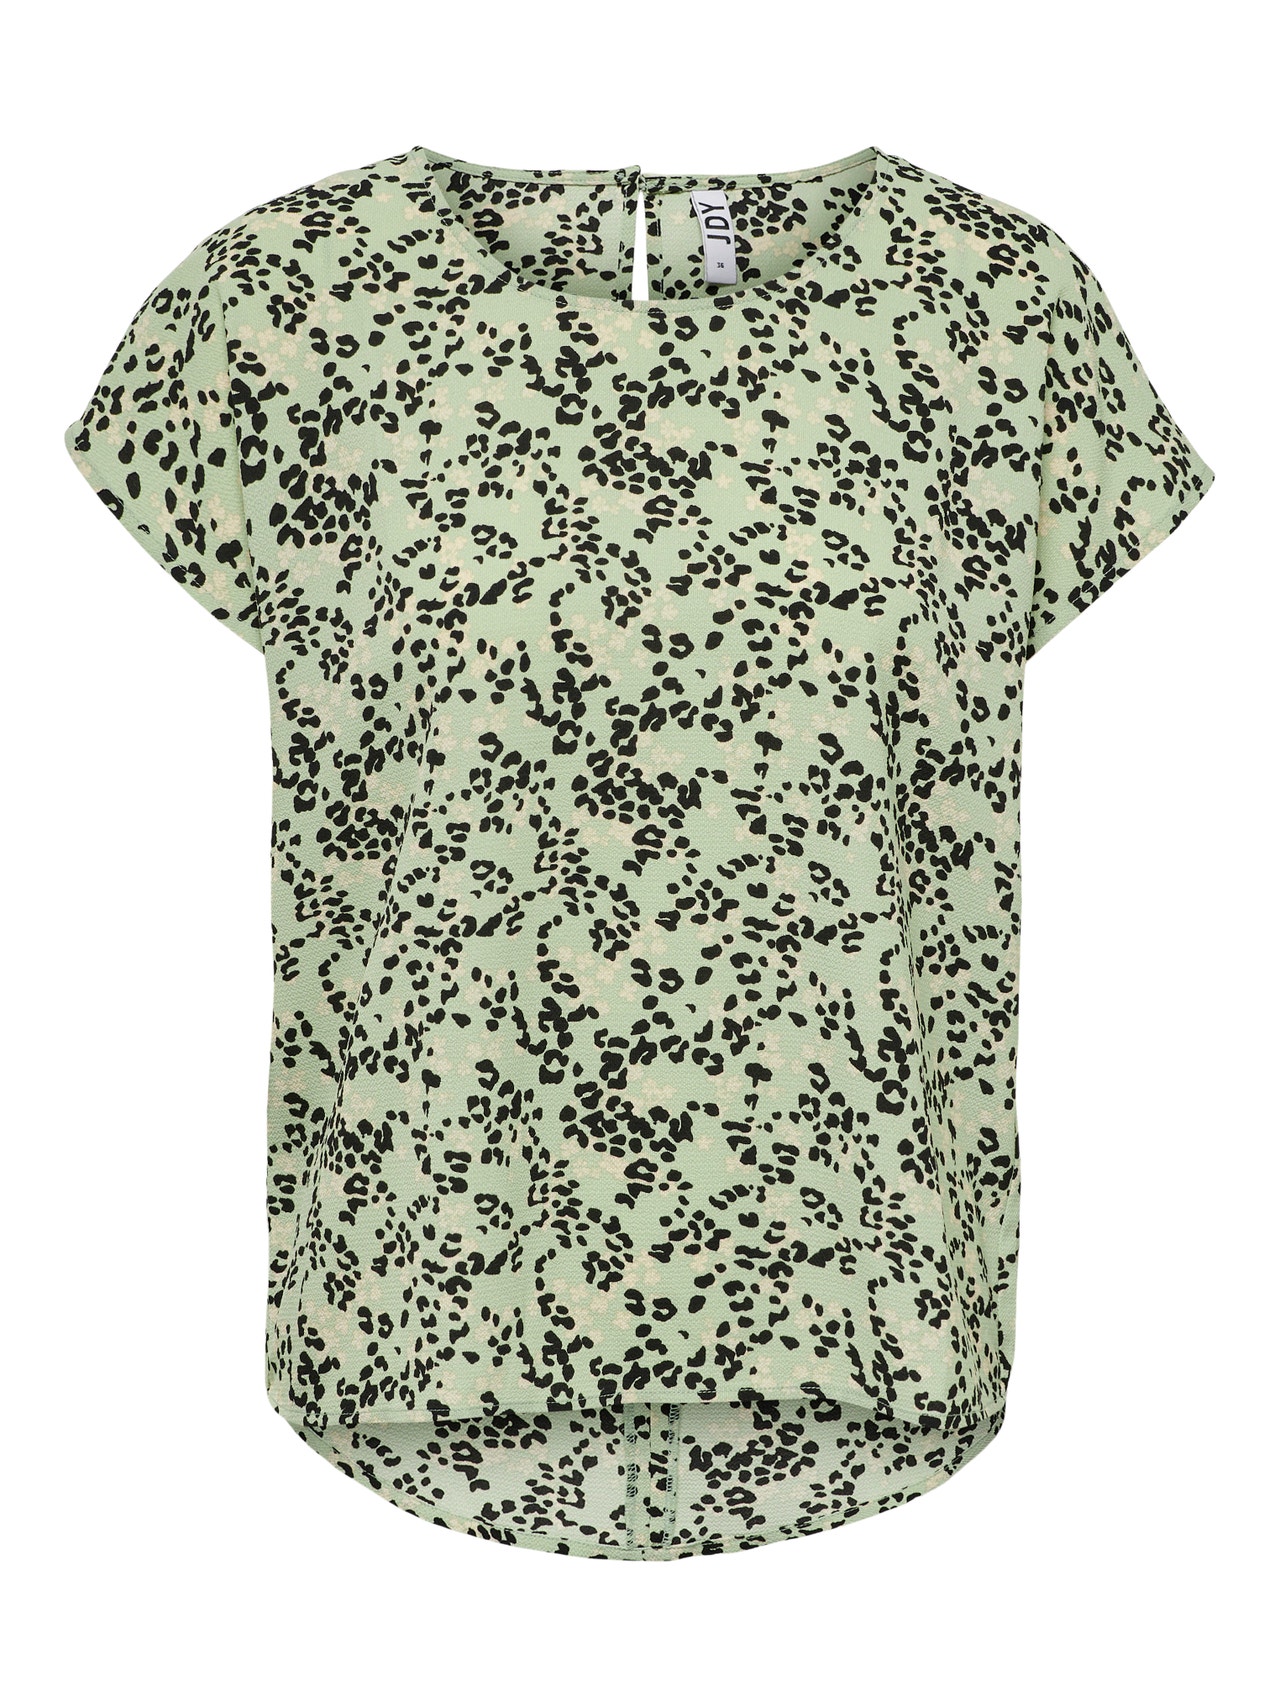 ONLY Printed Top -Chinois Green - 15234106